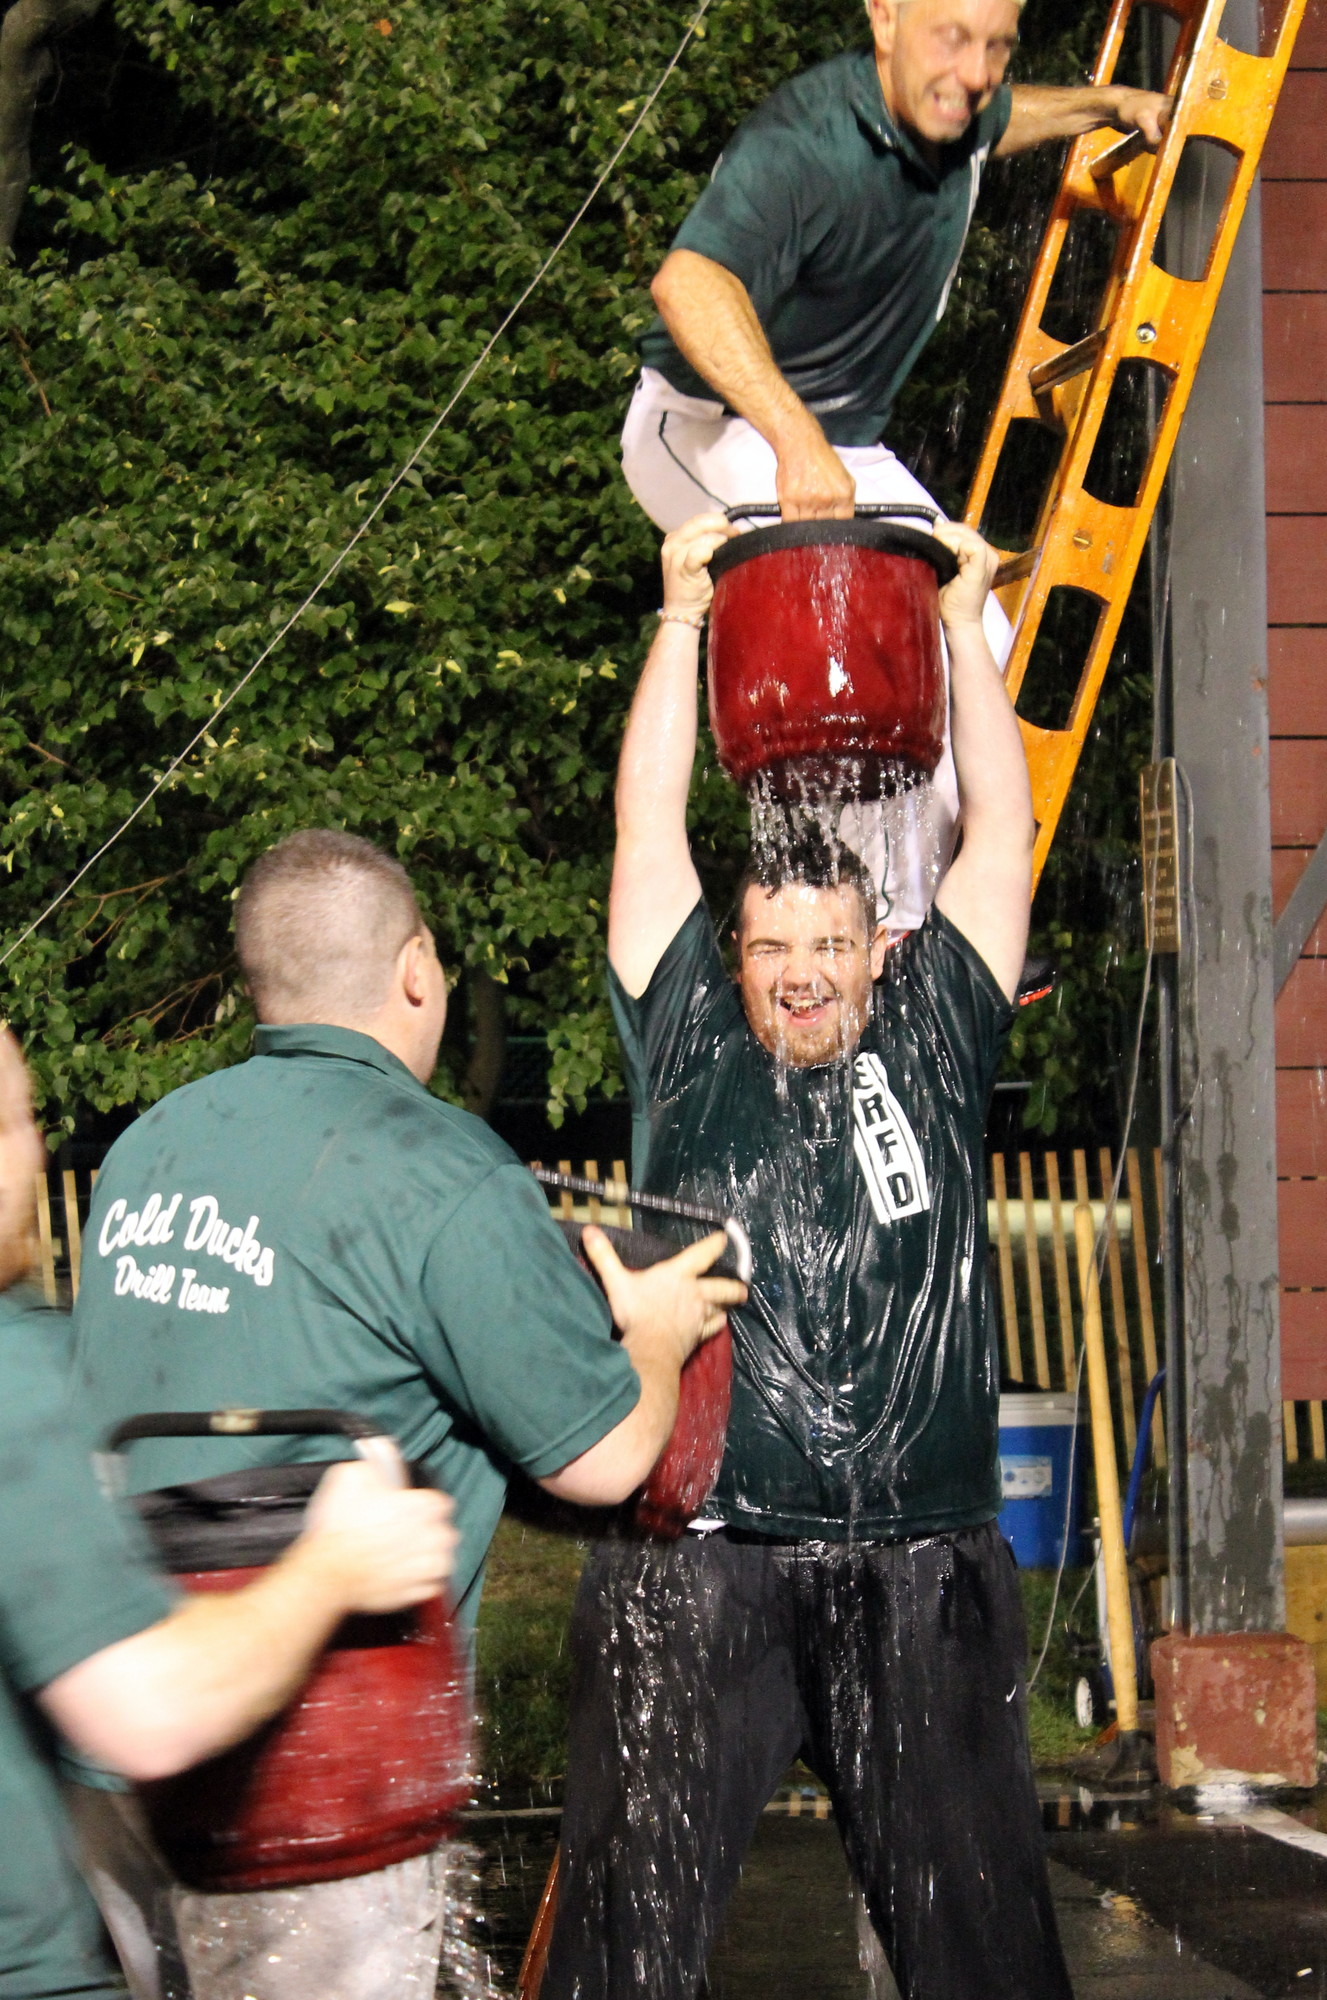 East Rockaway firefighter Sean Mckee got drenched while passing the bucket.